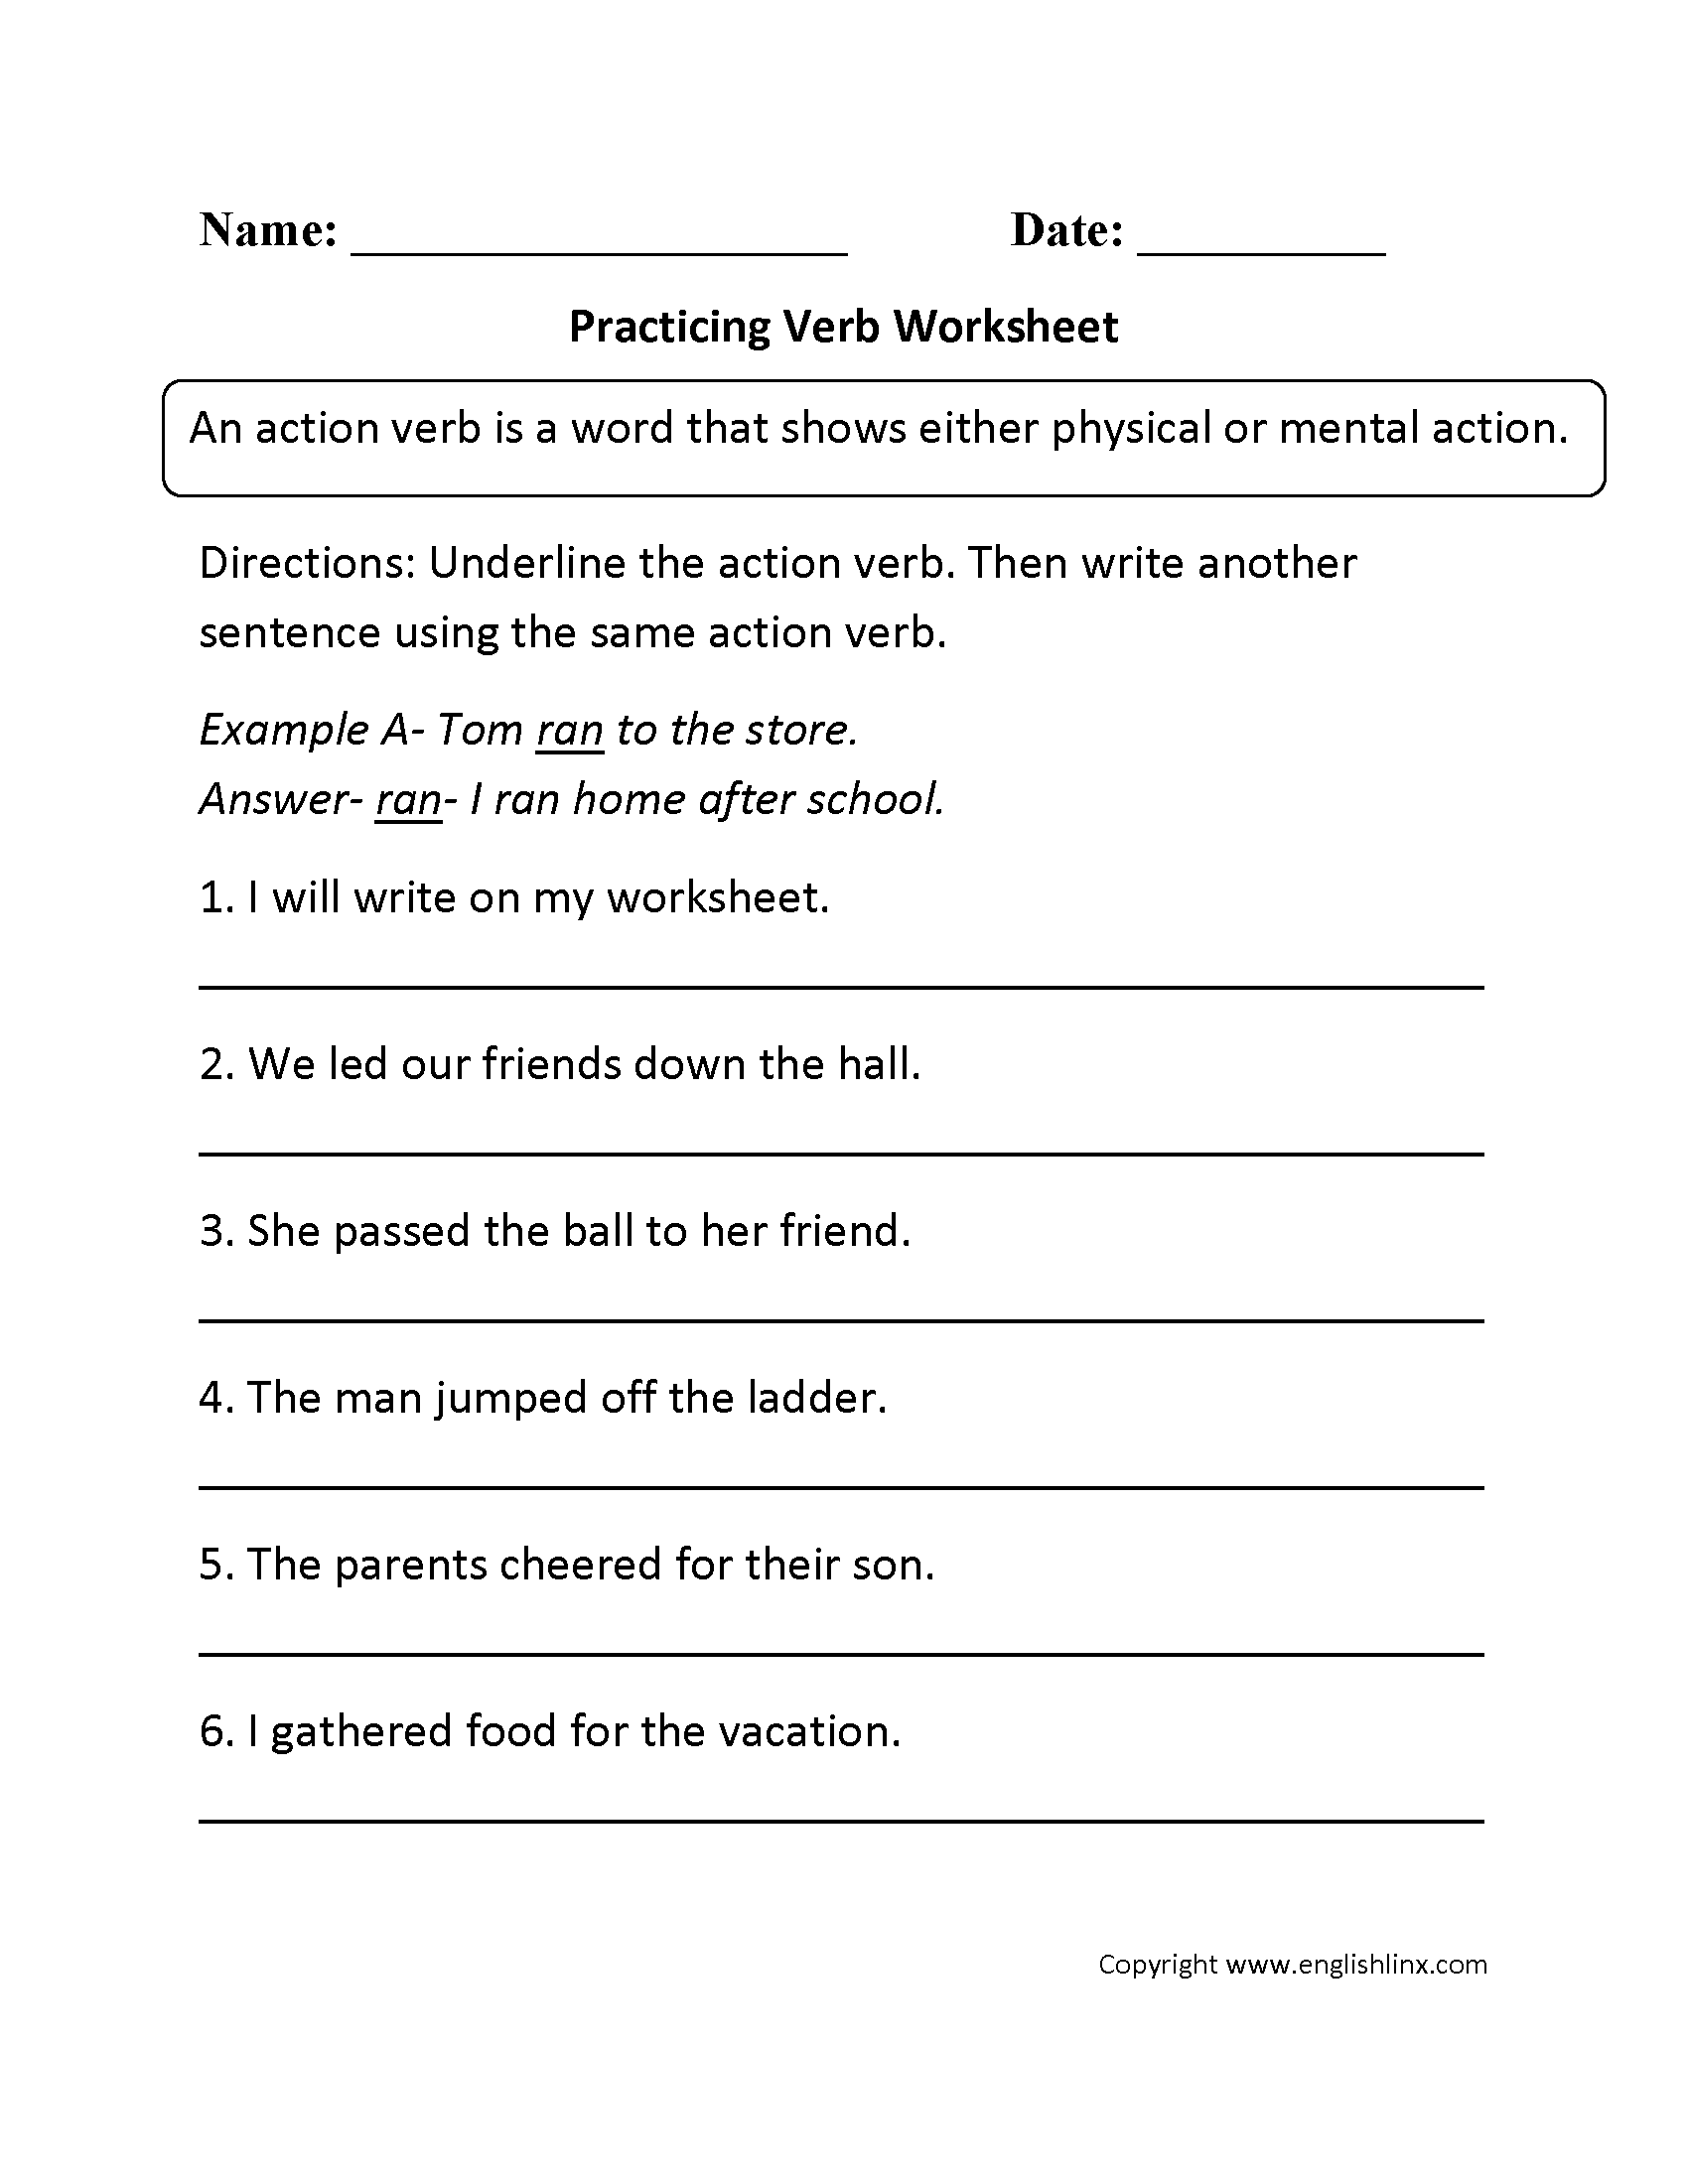 10-best-images-of-subject-linking-verbs-worksheet-action-and-linking-verbs-worksheets-helping